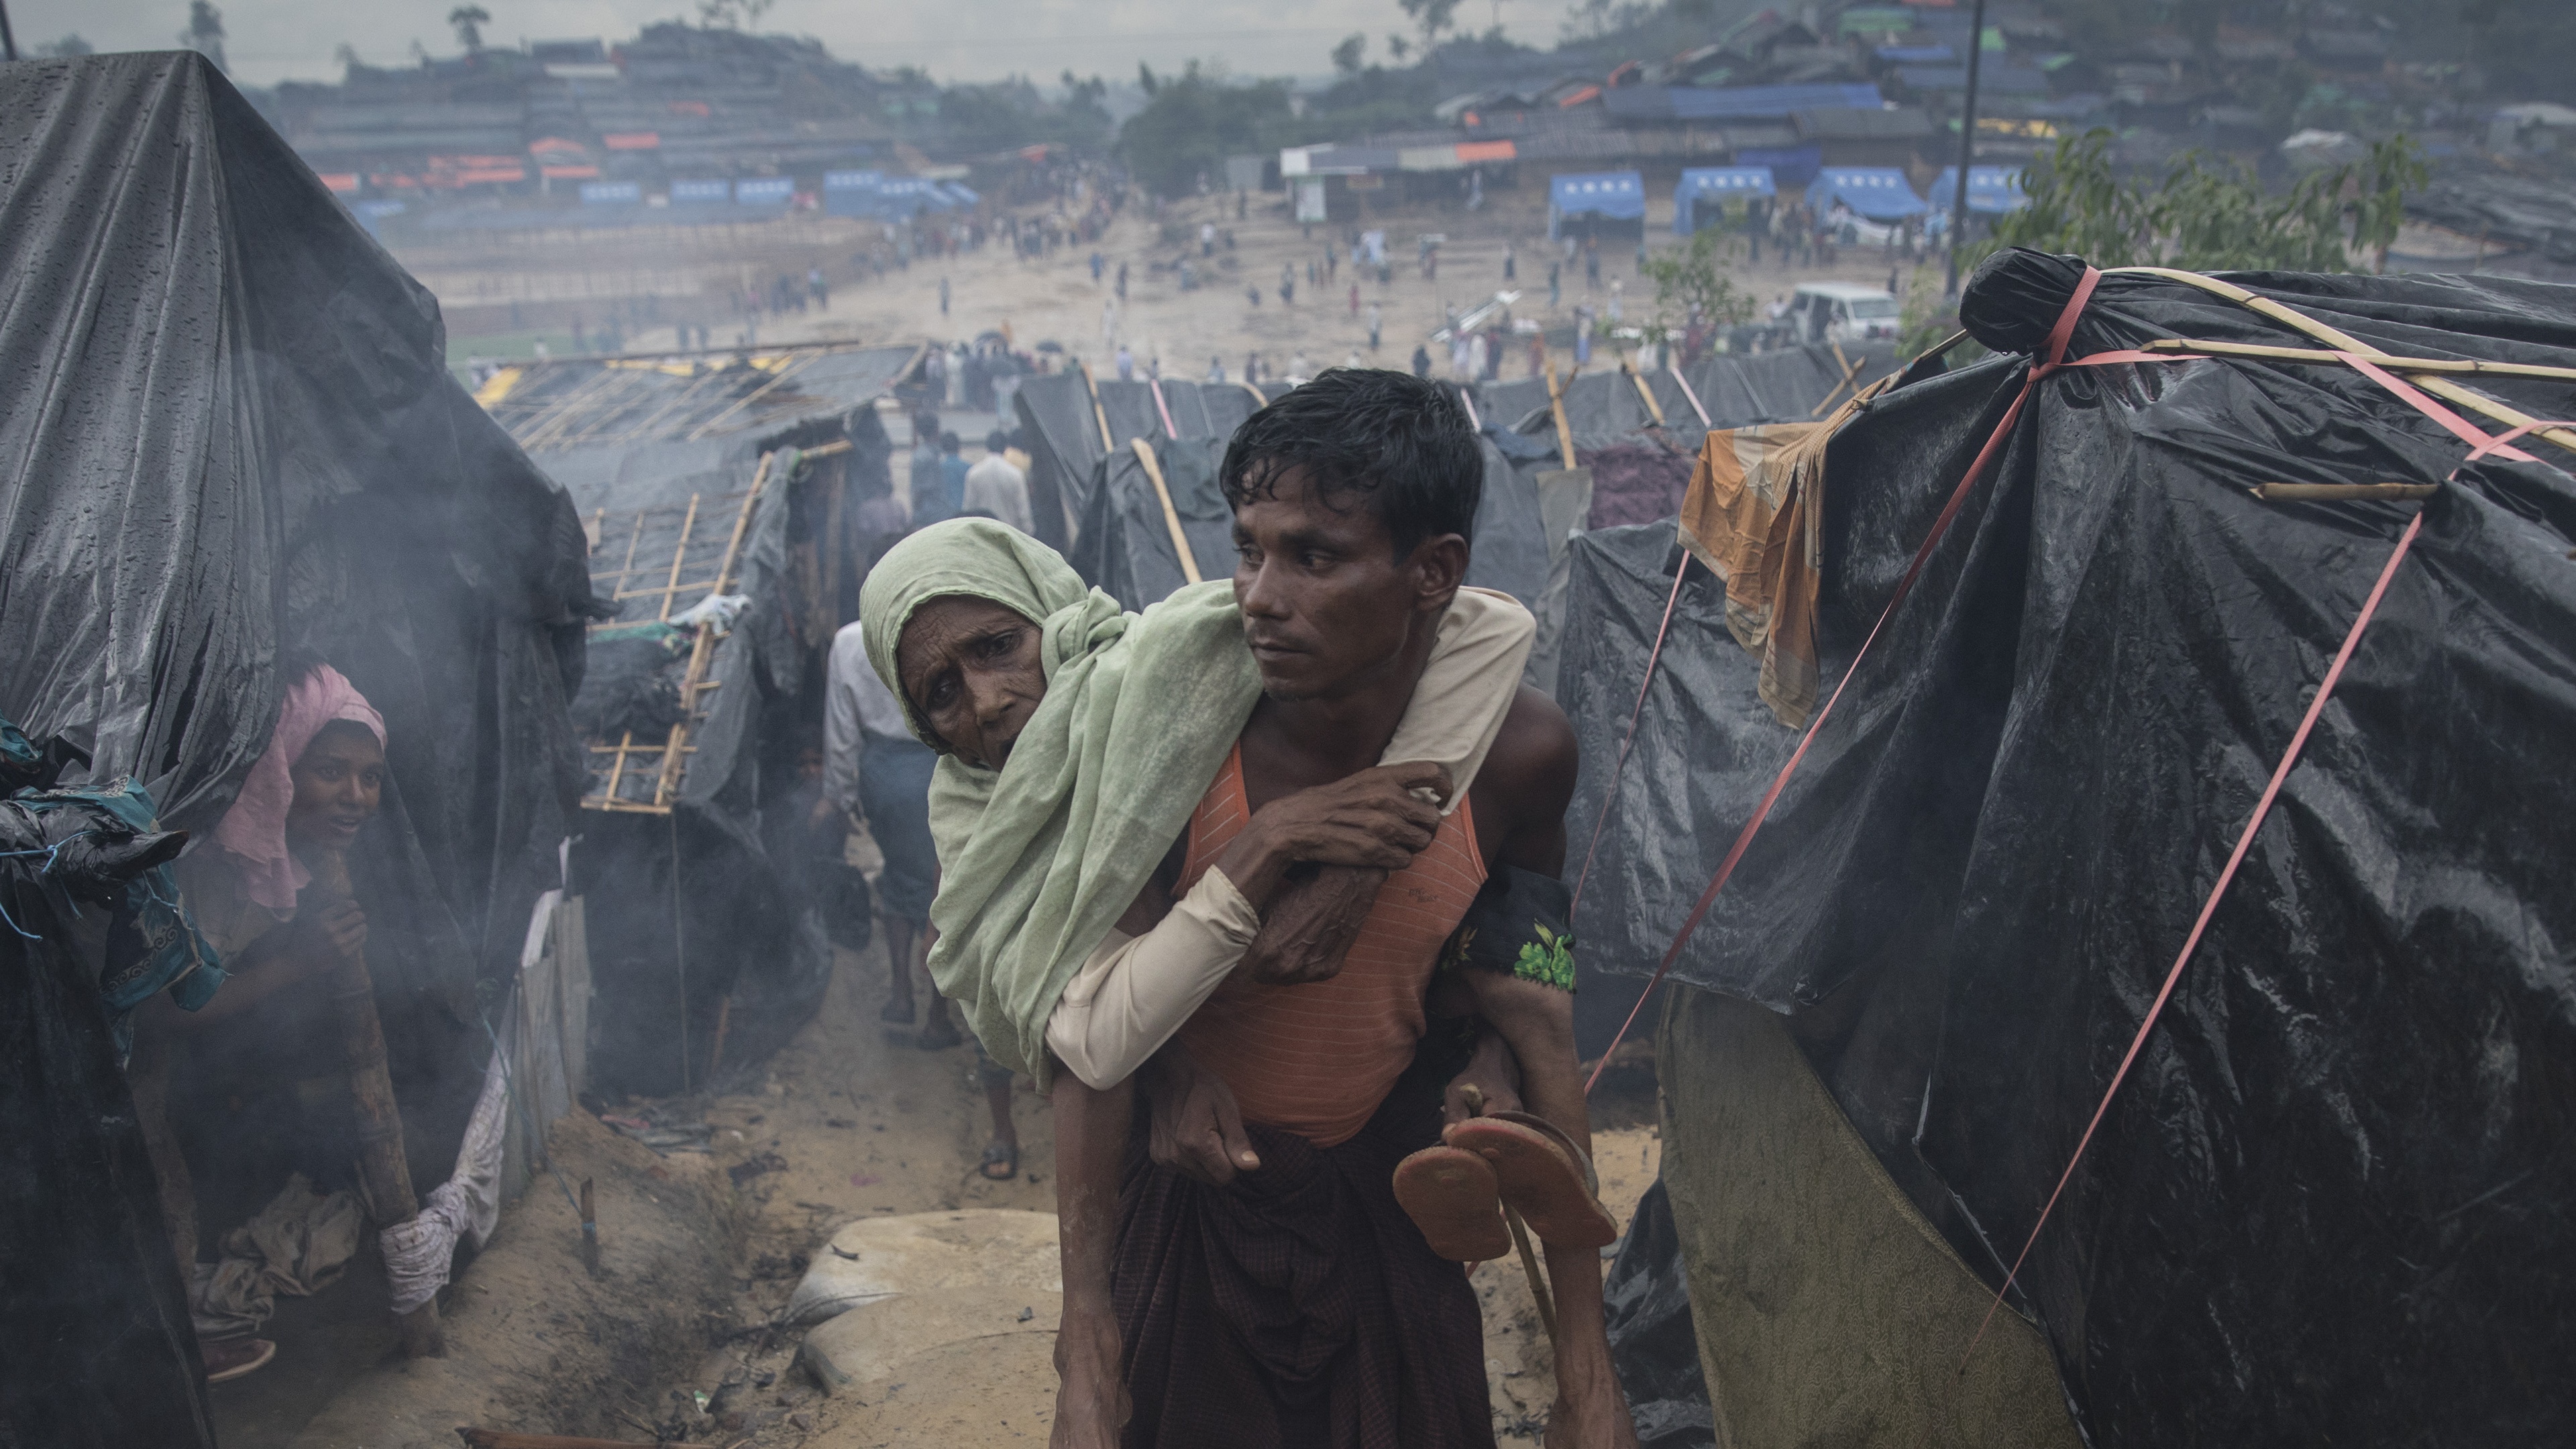 A Rohingya refugee carries his mother in Cox’s Bazar refugee camp, Bangladesh